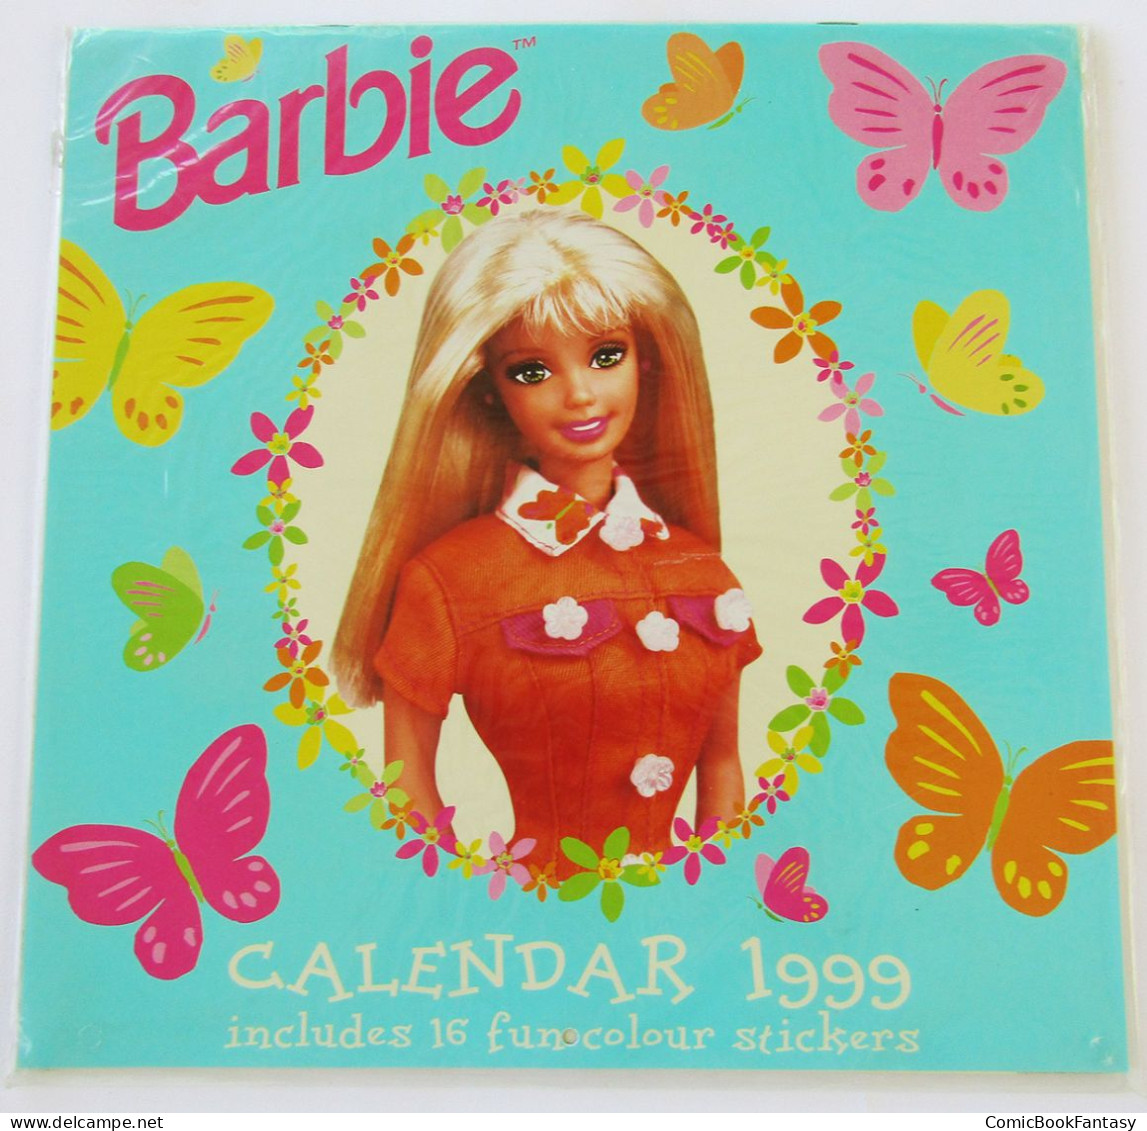 Barbie 1999 Wall Calendar - New & Sealed. Extremely Rare. Collectible - Big : 1991-00